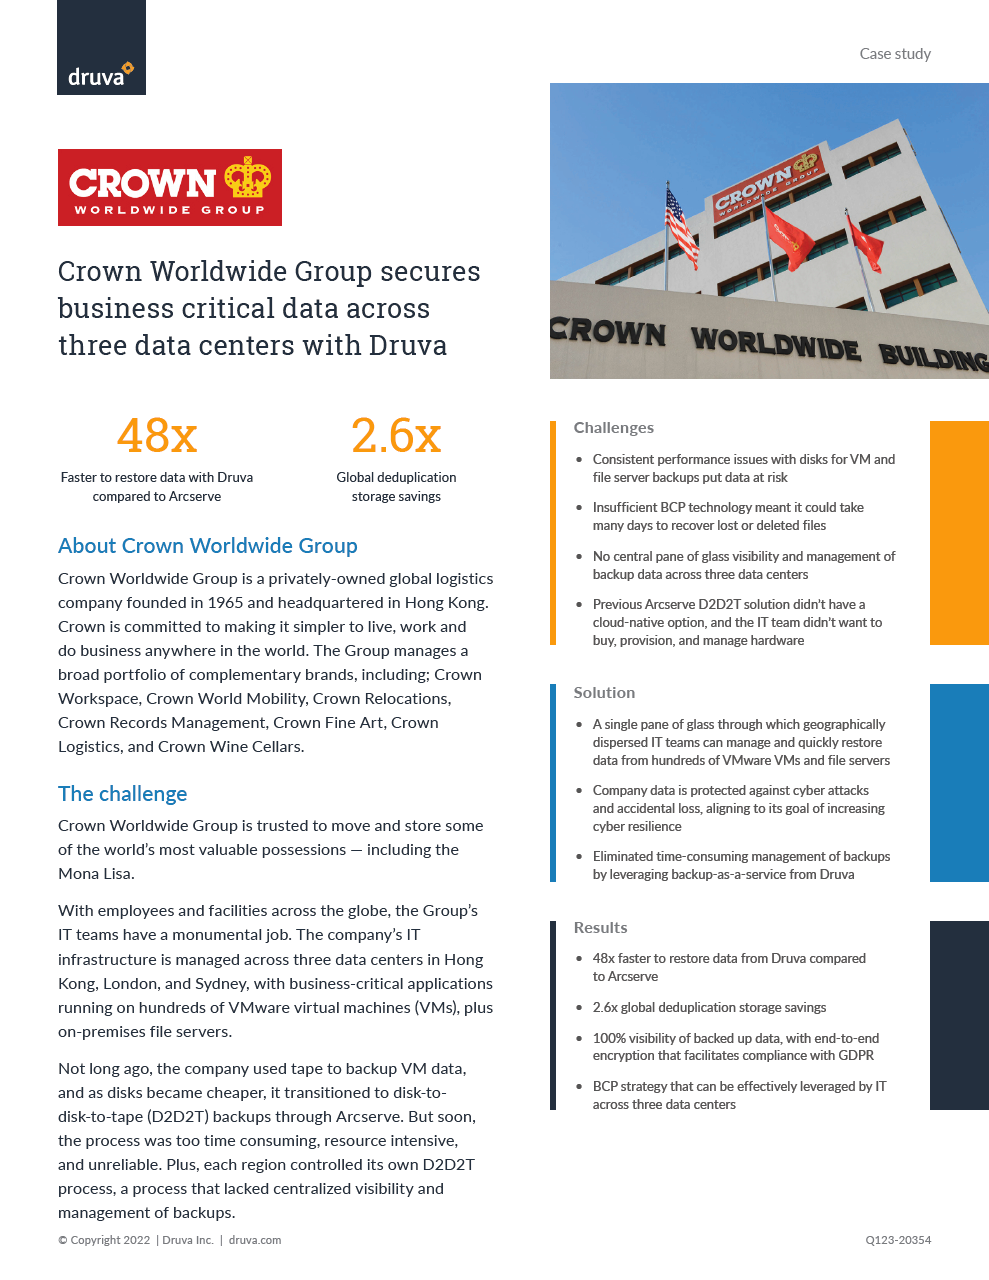 Crown Worldwide Group secures business-critical data across three data centers with Druva